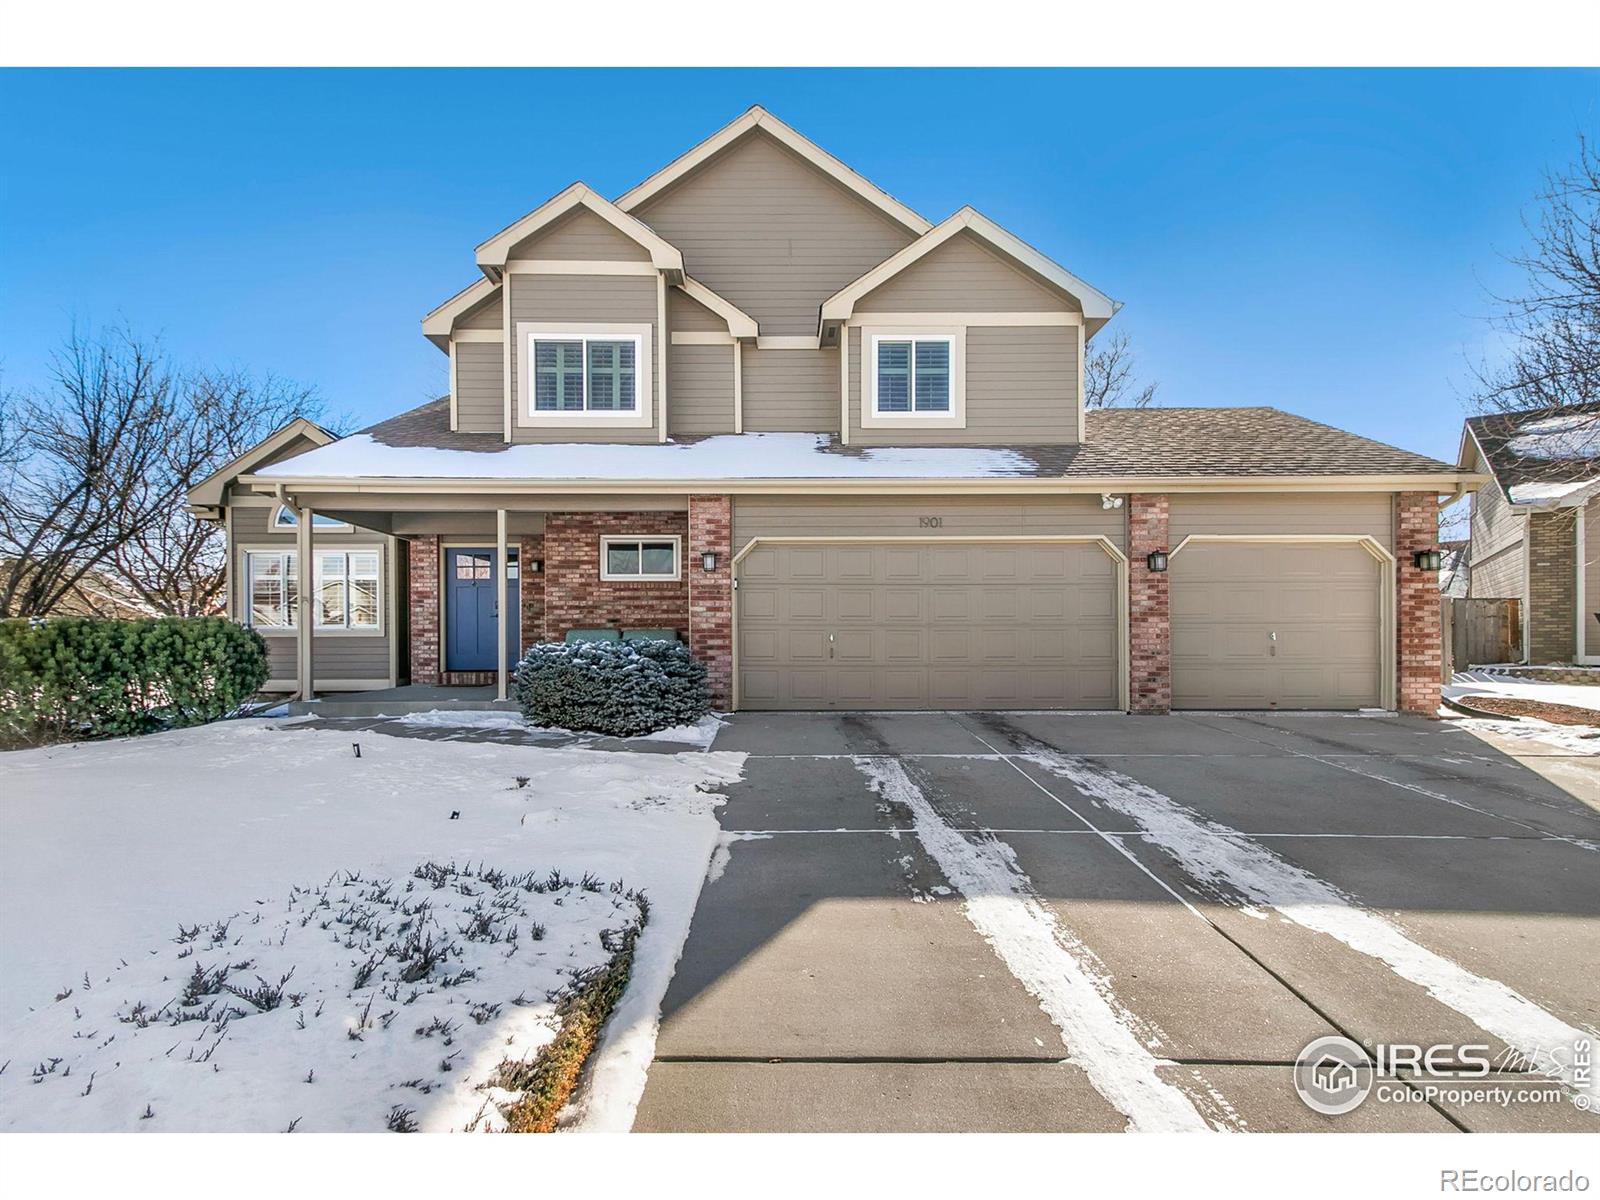 1901  Glenview Court, fort collins MLS: 4567891003106 Beds: 4 Baths: 4 Price: $695,000